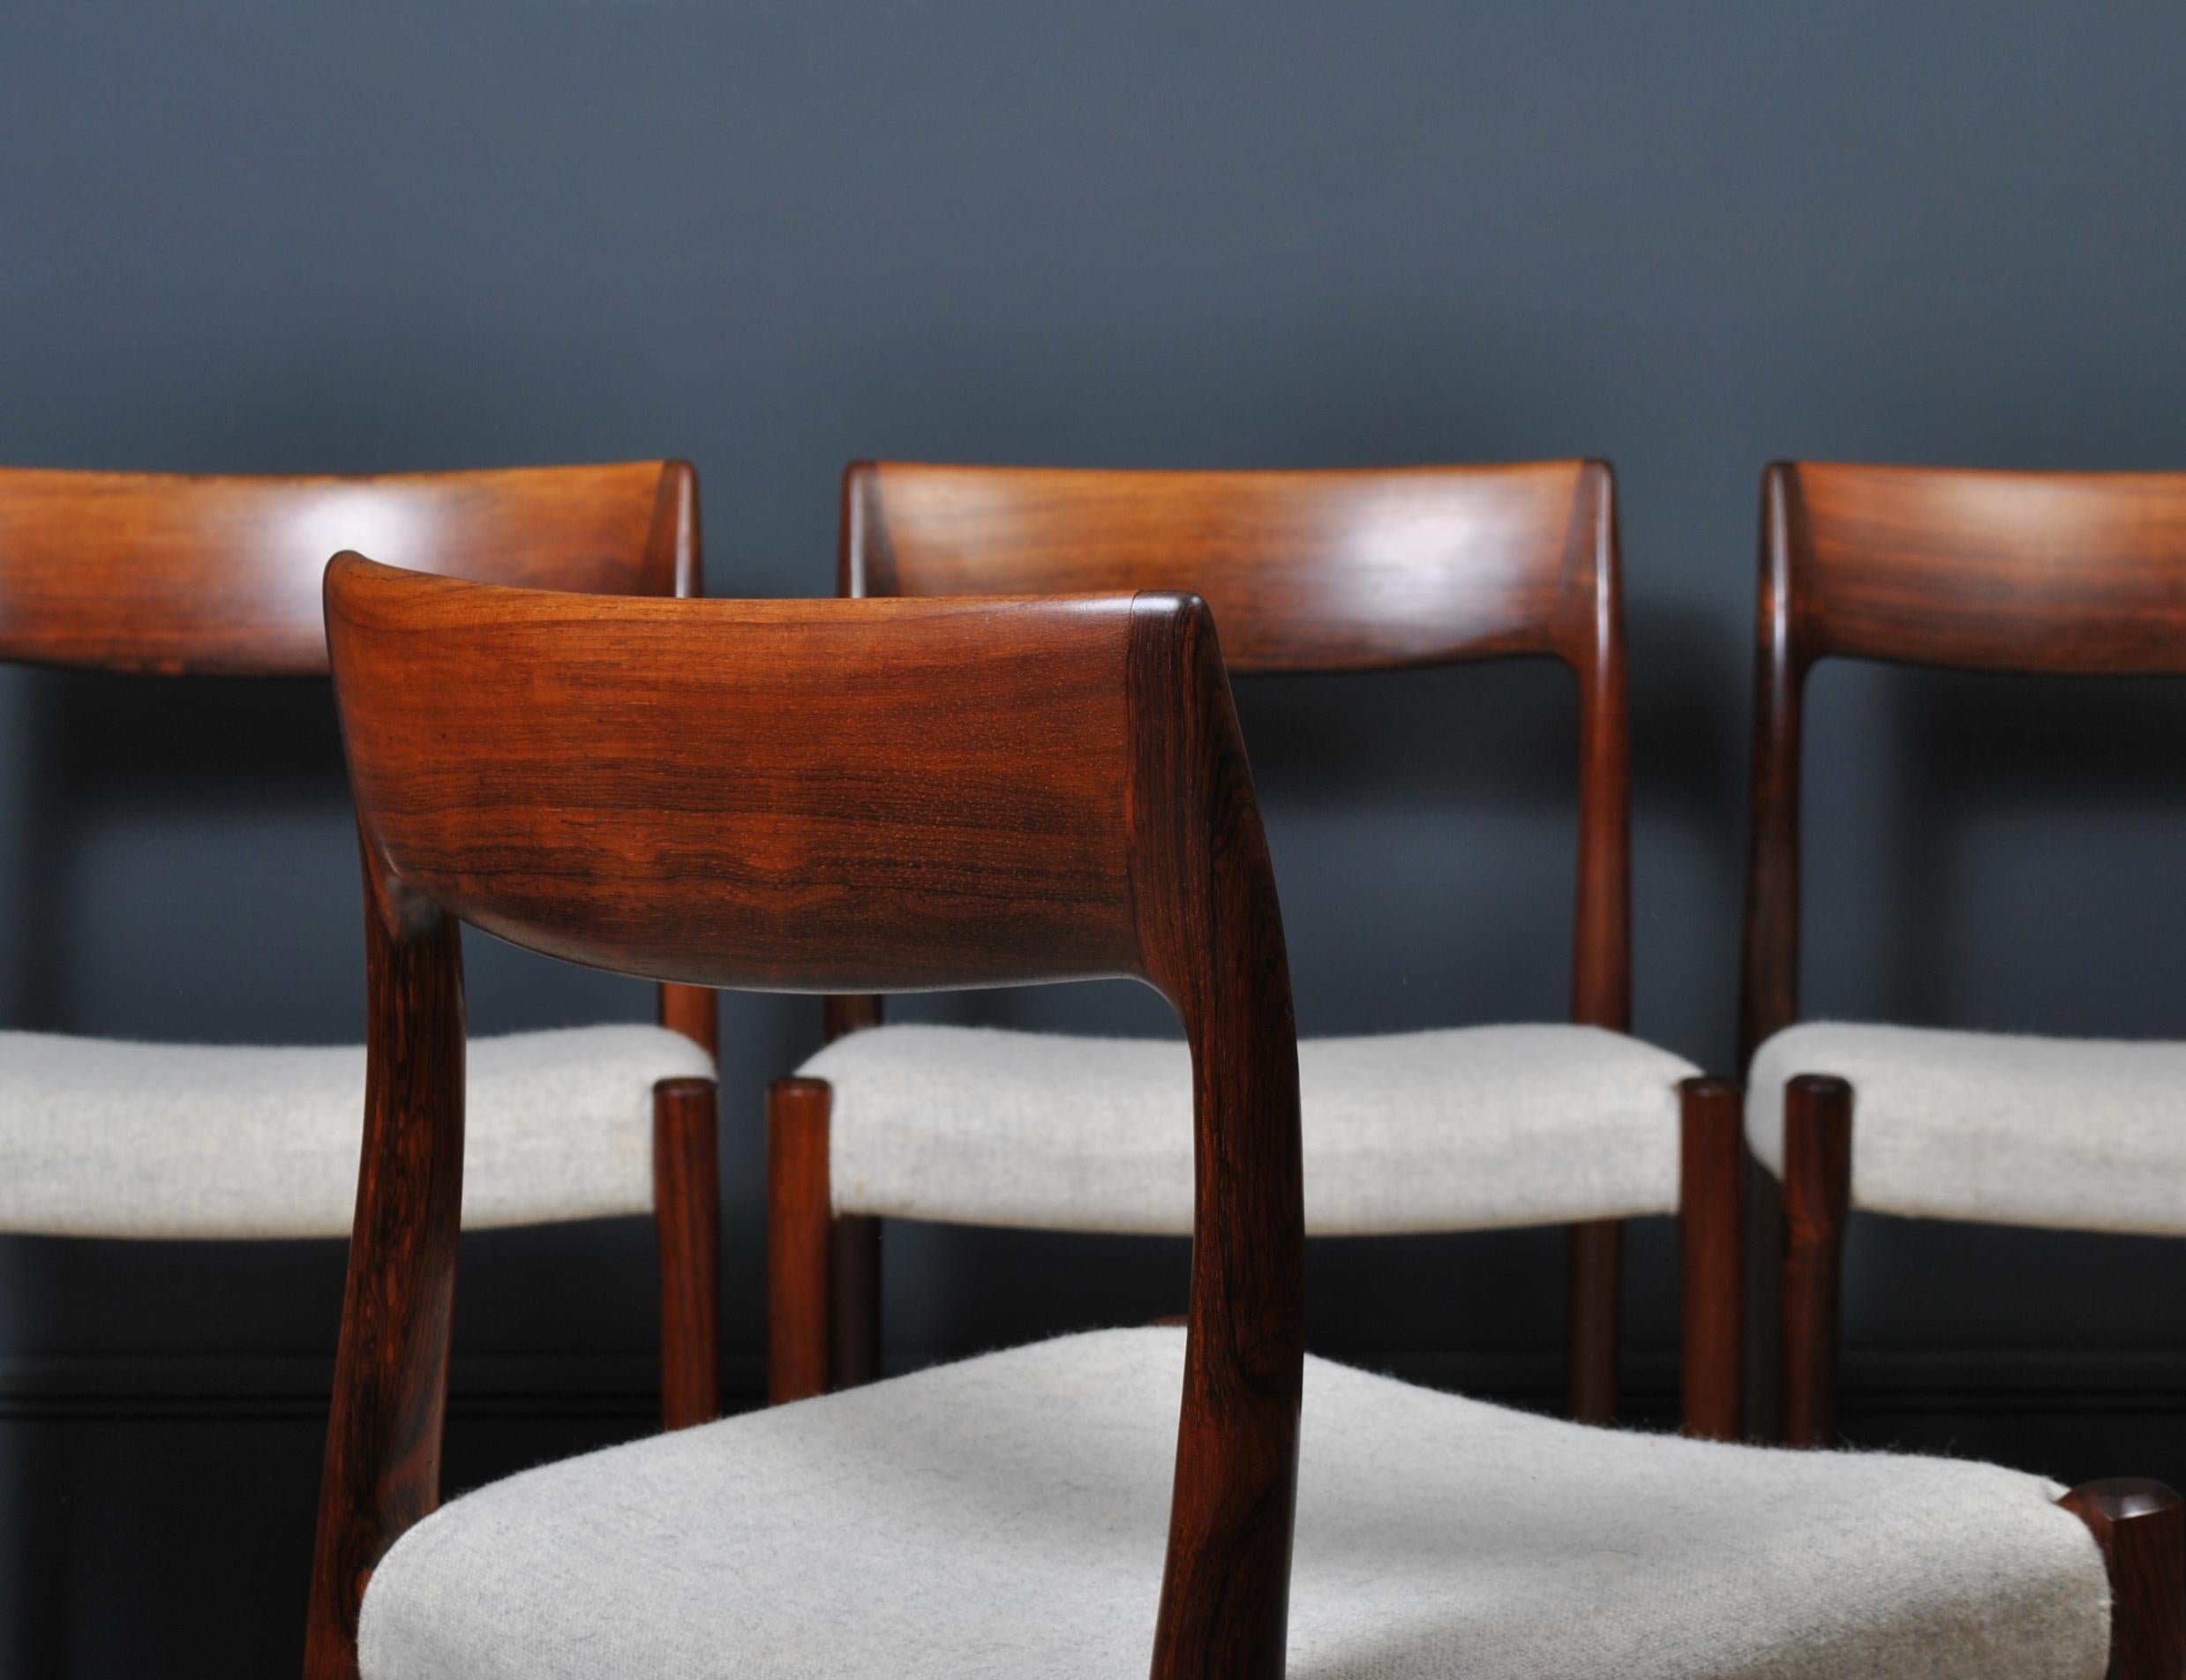 Outstanding set of 4 rosewood model 77 dining chairs designed by Niels O. Moller for J.L. Moller Mobelfabrik, Denmark late 1950’s. Absolutely beautiful rosewood.
Existing grey woollen fabric. Custom Reupholstery is available in fabric or